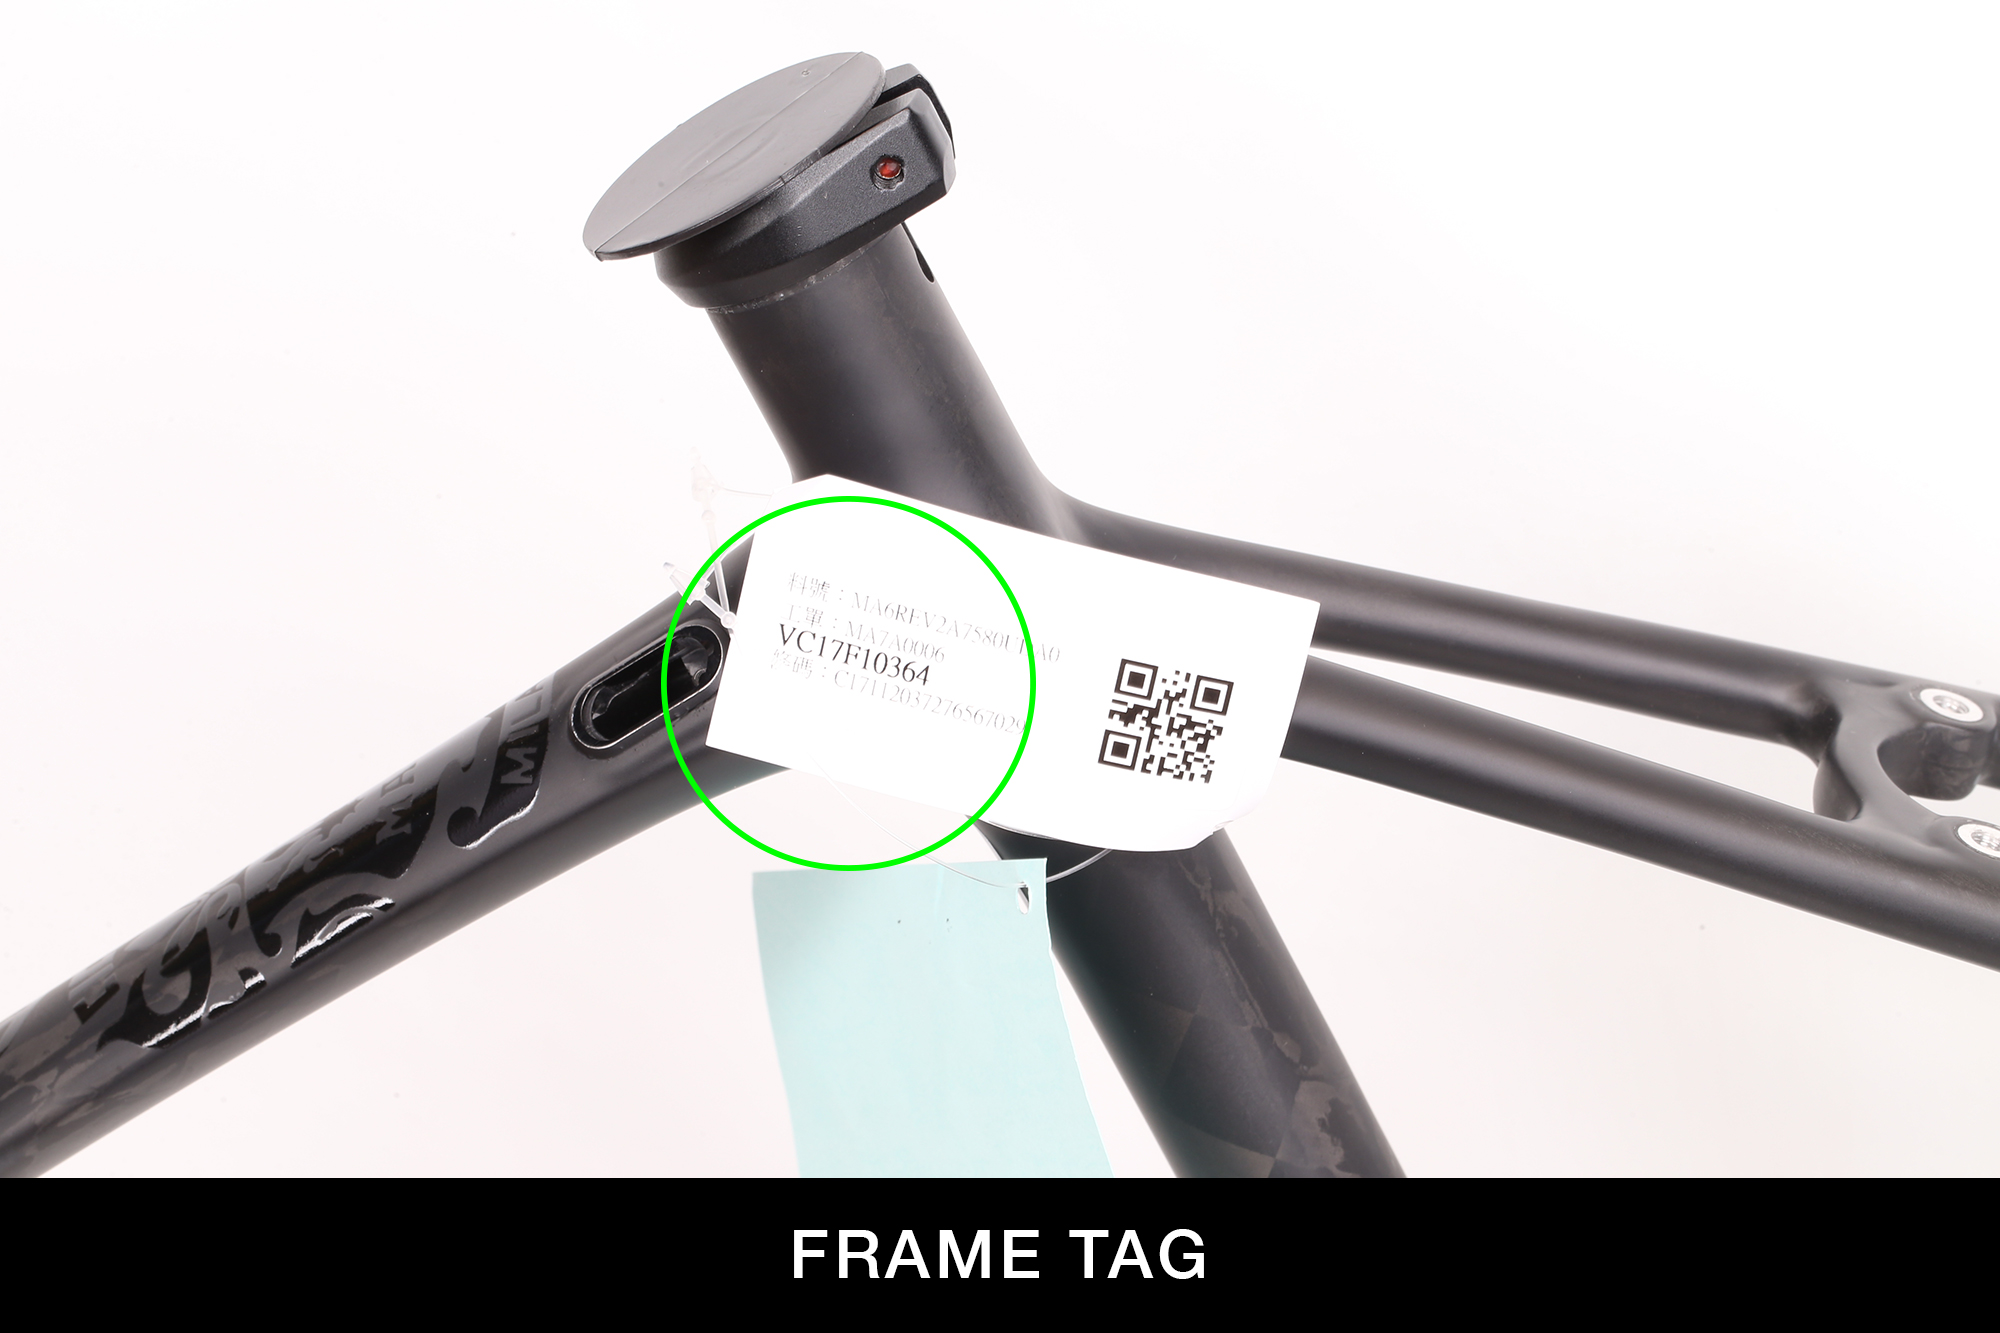 Serial location on frame tag